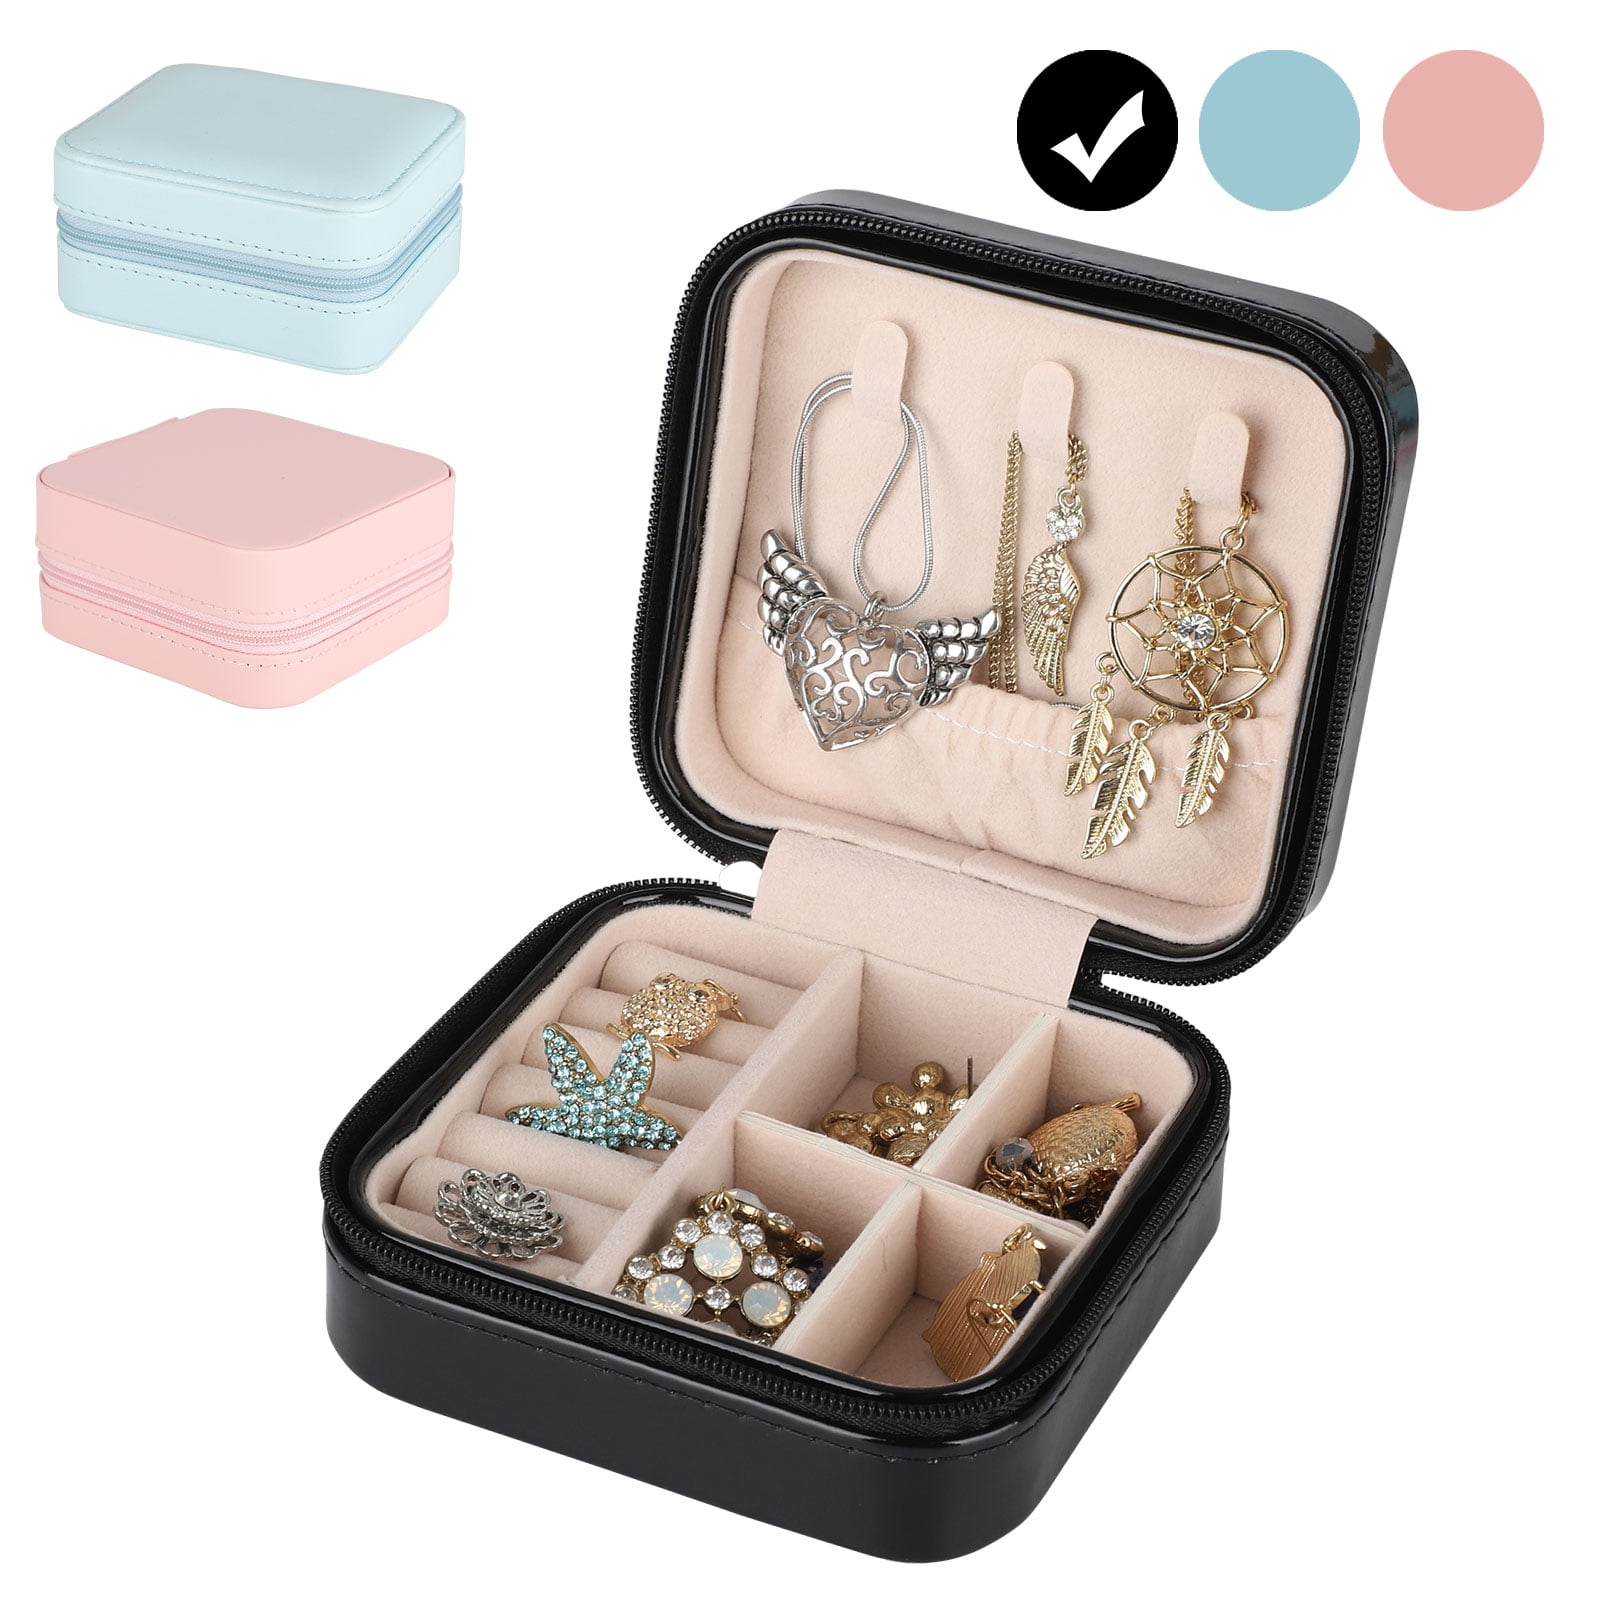 Jewelry Box Travel Jewelry Organizer Cases for Women¡¯s Necklace Earrings Rings and Travel Accessories 